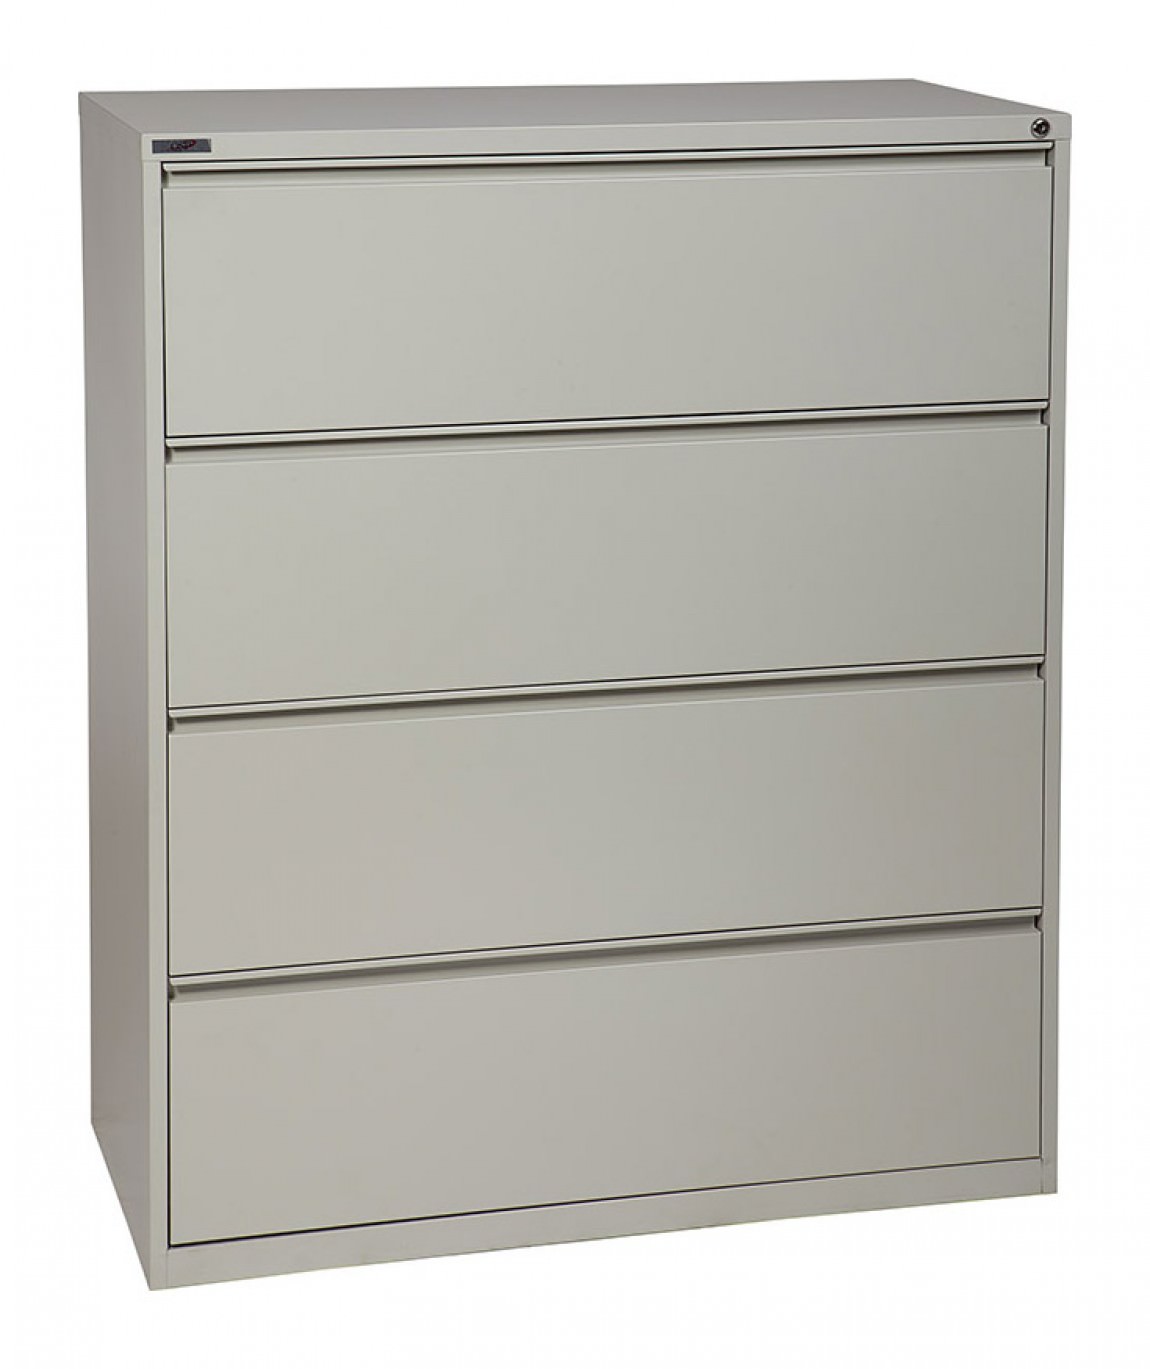 4 Drawer Lateral Filing Cabinet - 42 Wide